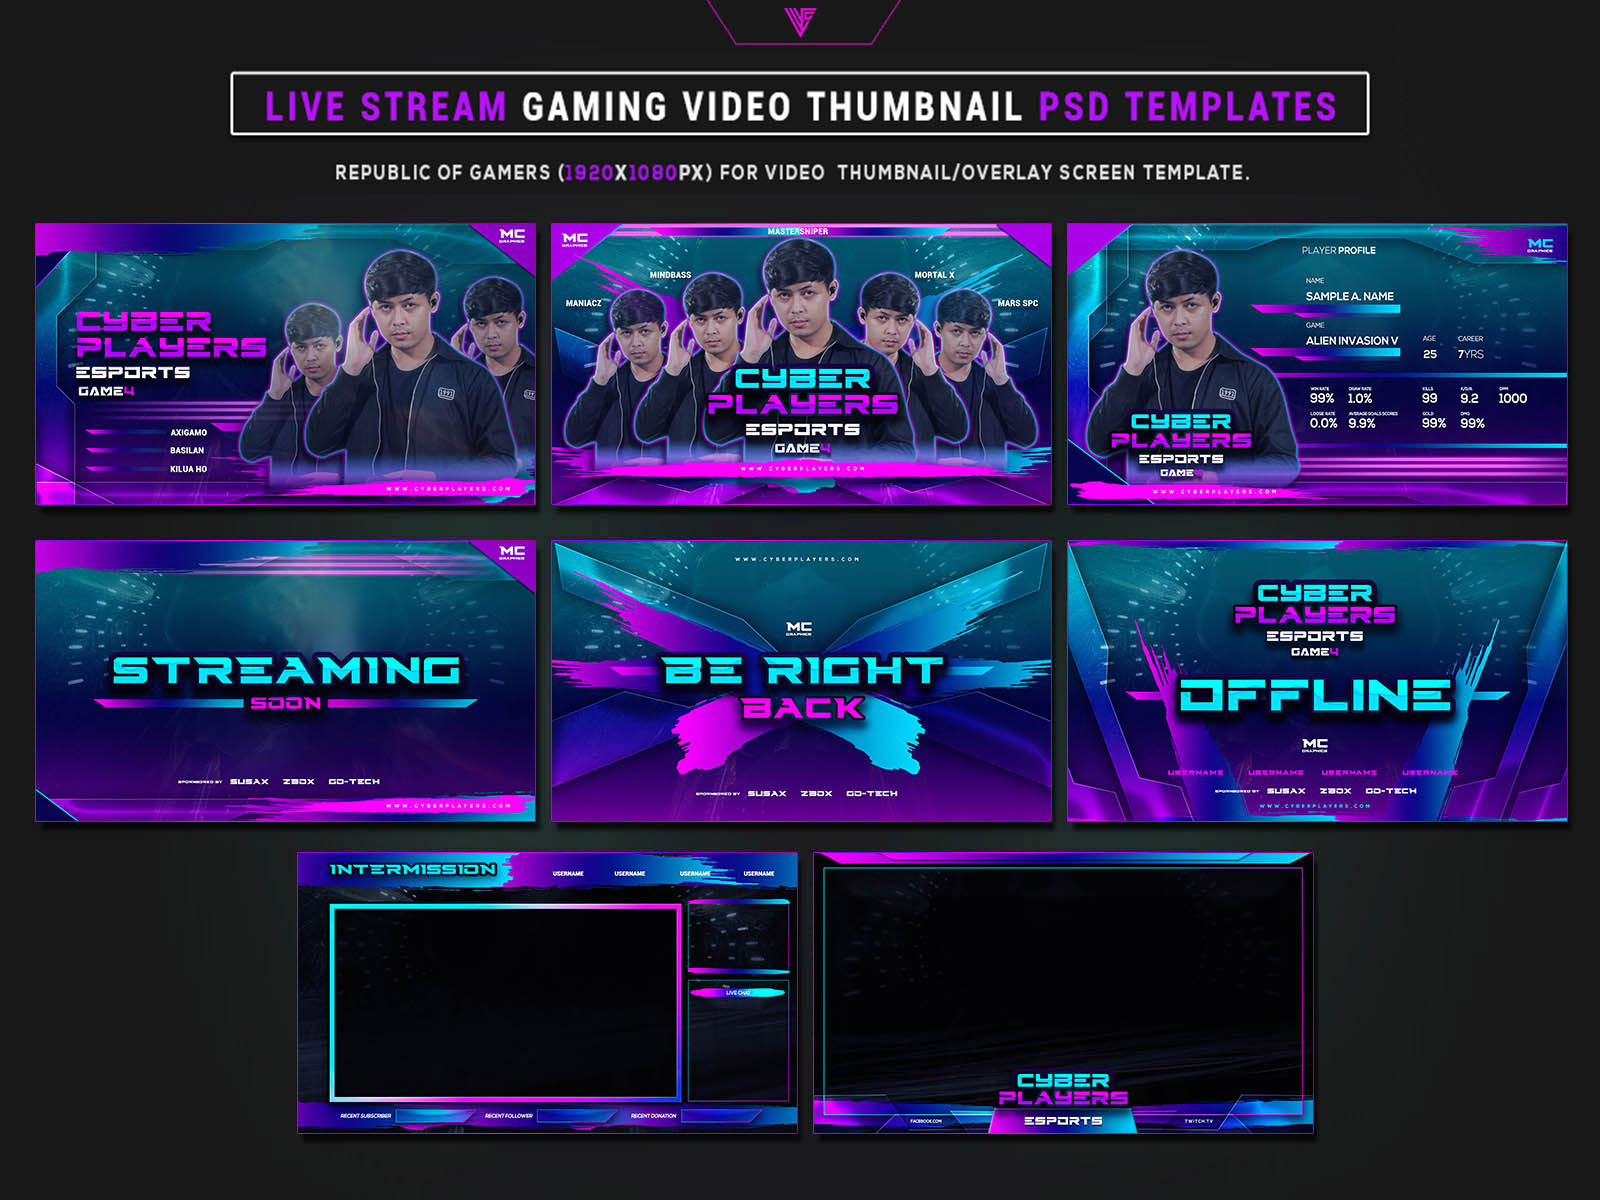 Cyber Players Live Stream Gaming Video Photoshop Templates by mcgraphics on Dribbble